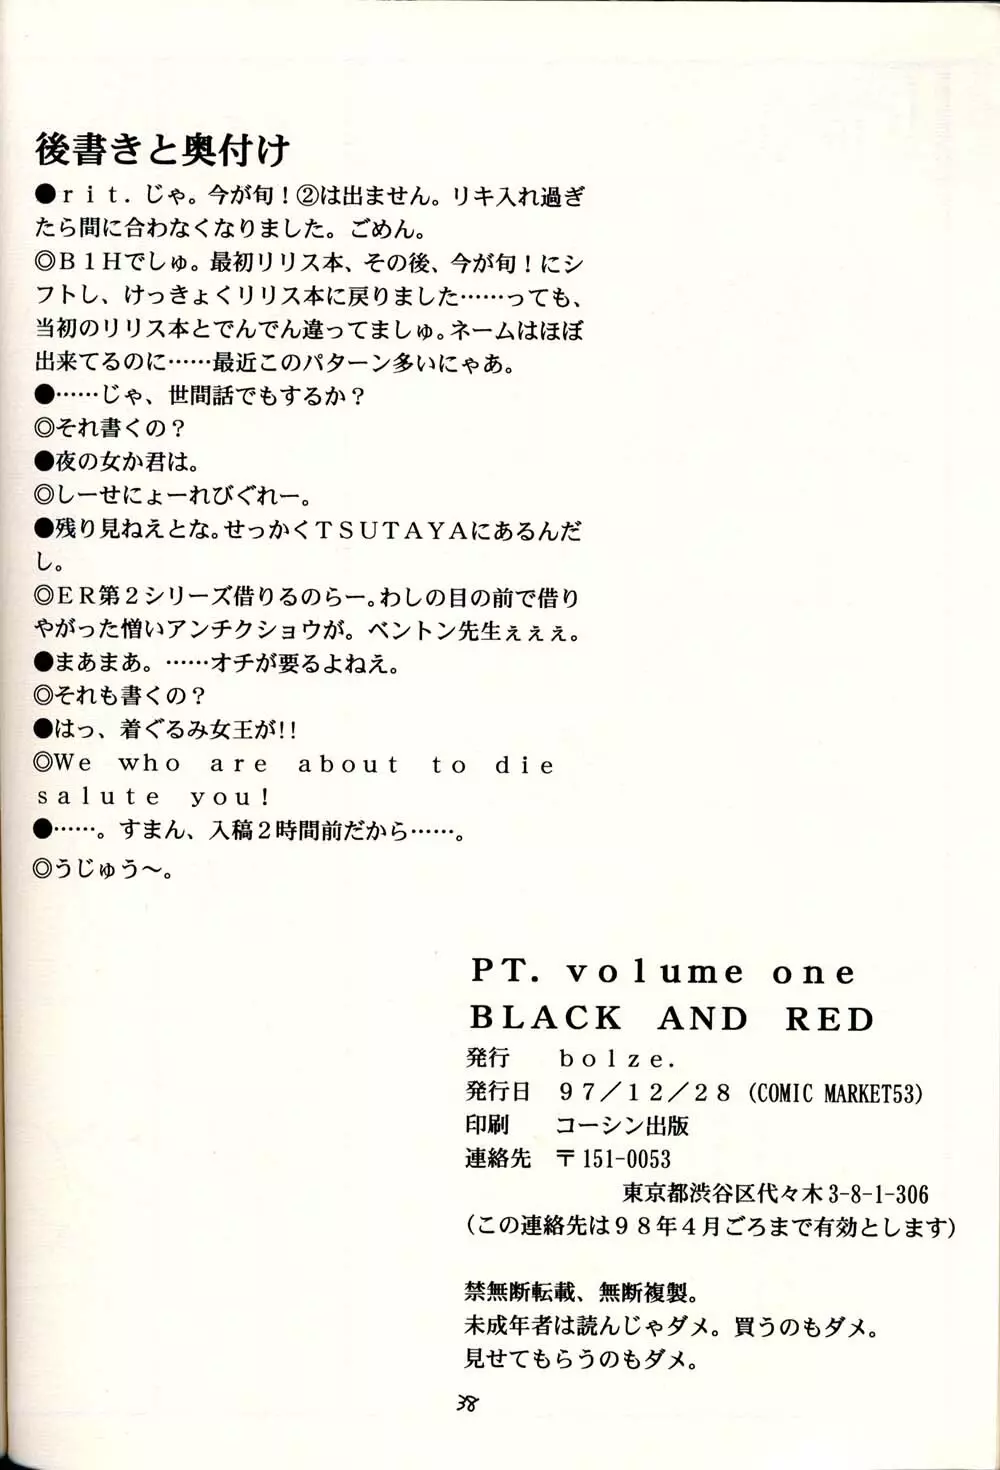 PT Vol 1 – Black and Red 37ページ